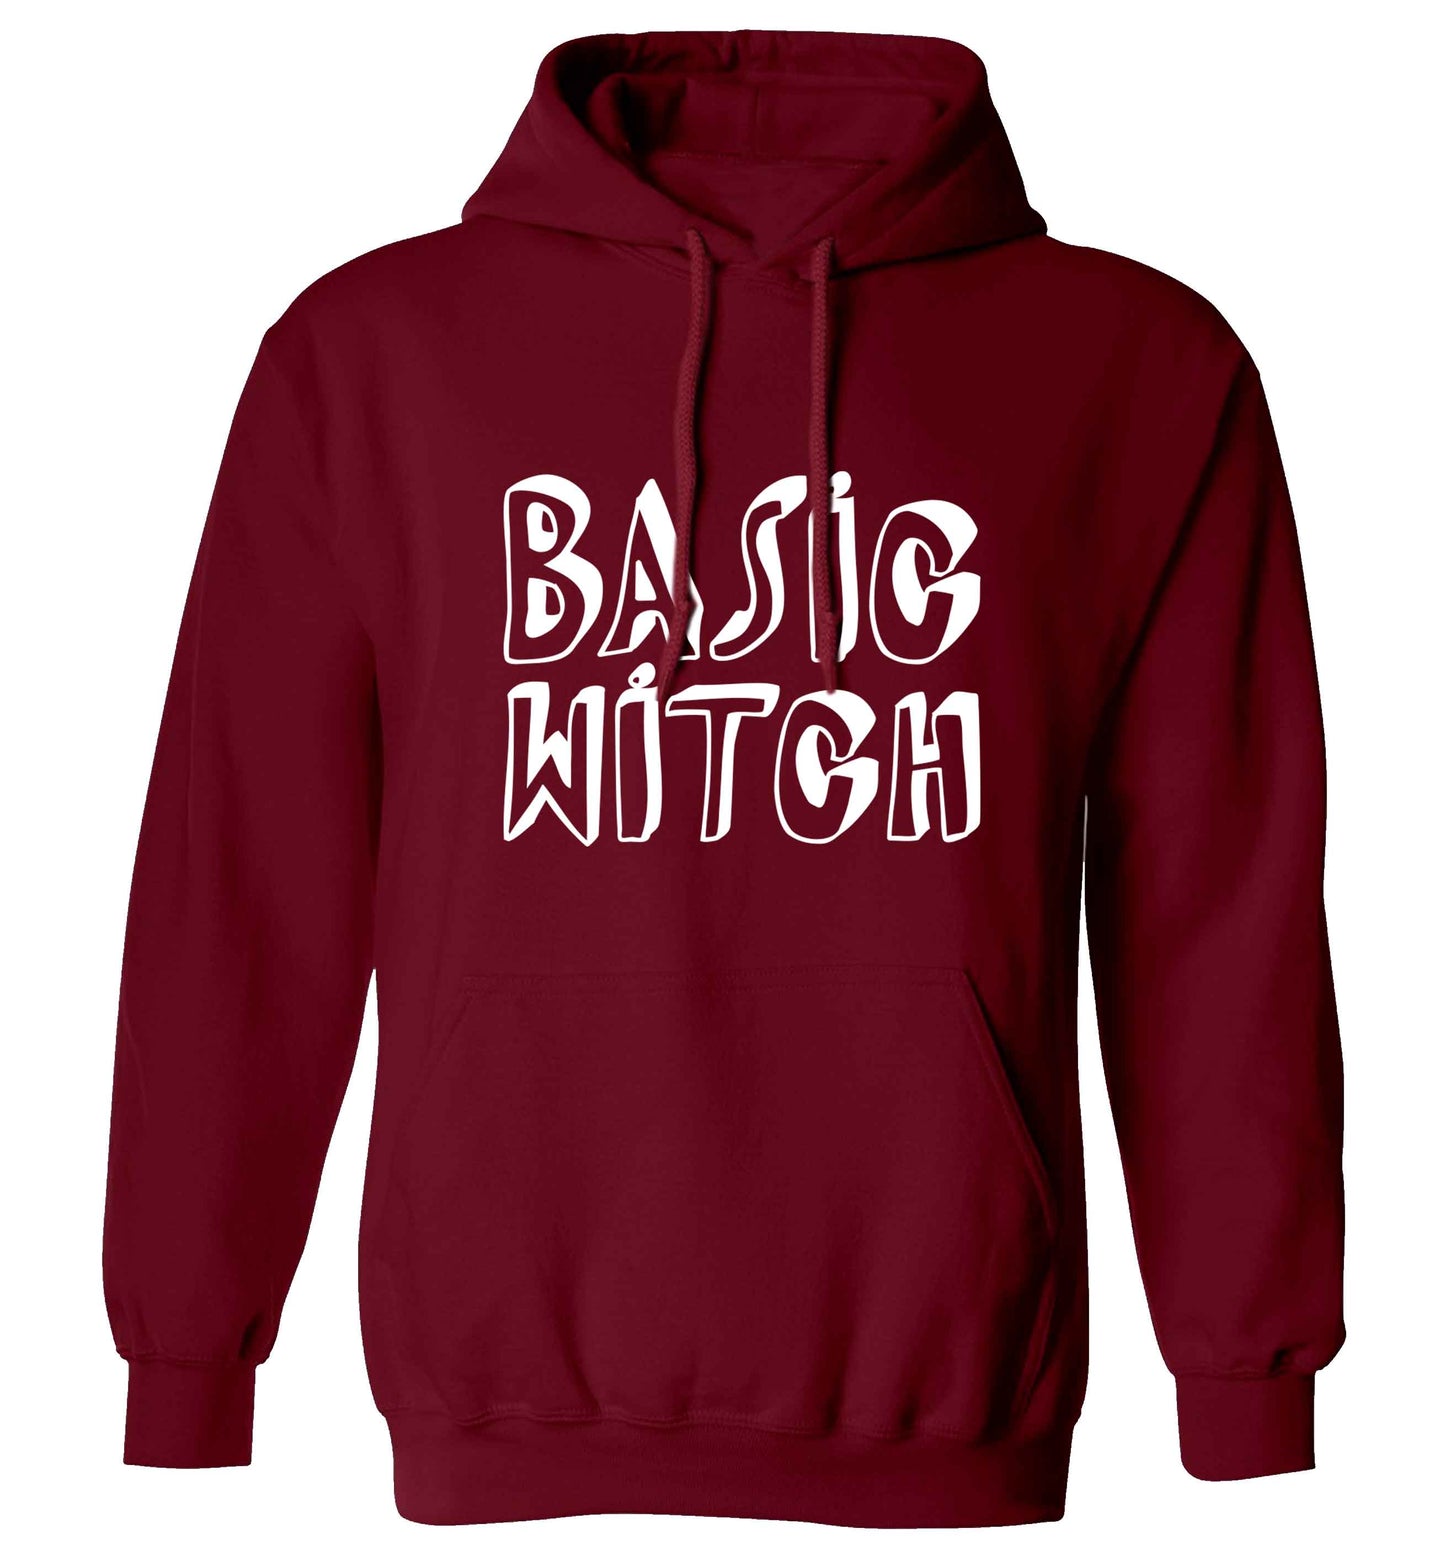 Basic witch adults unisex maroon hoodie 2XL